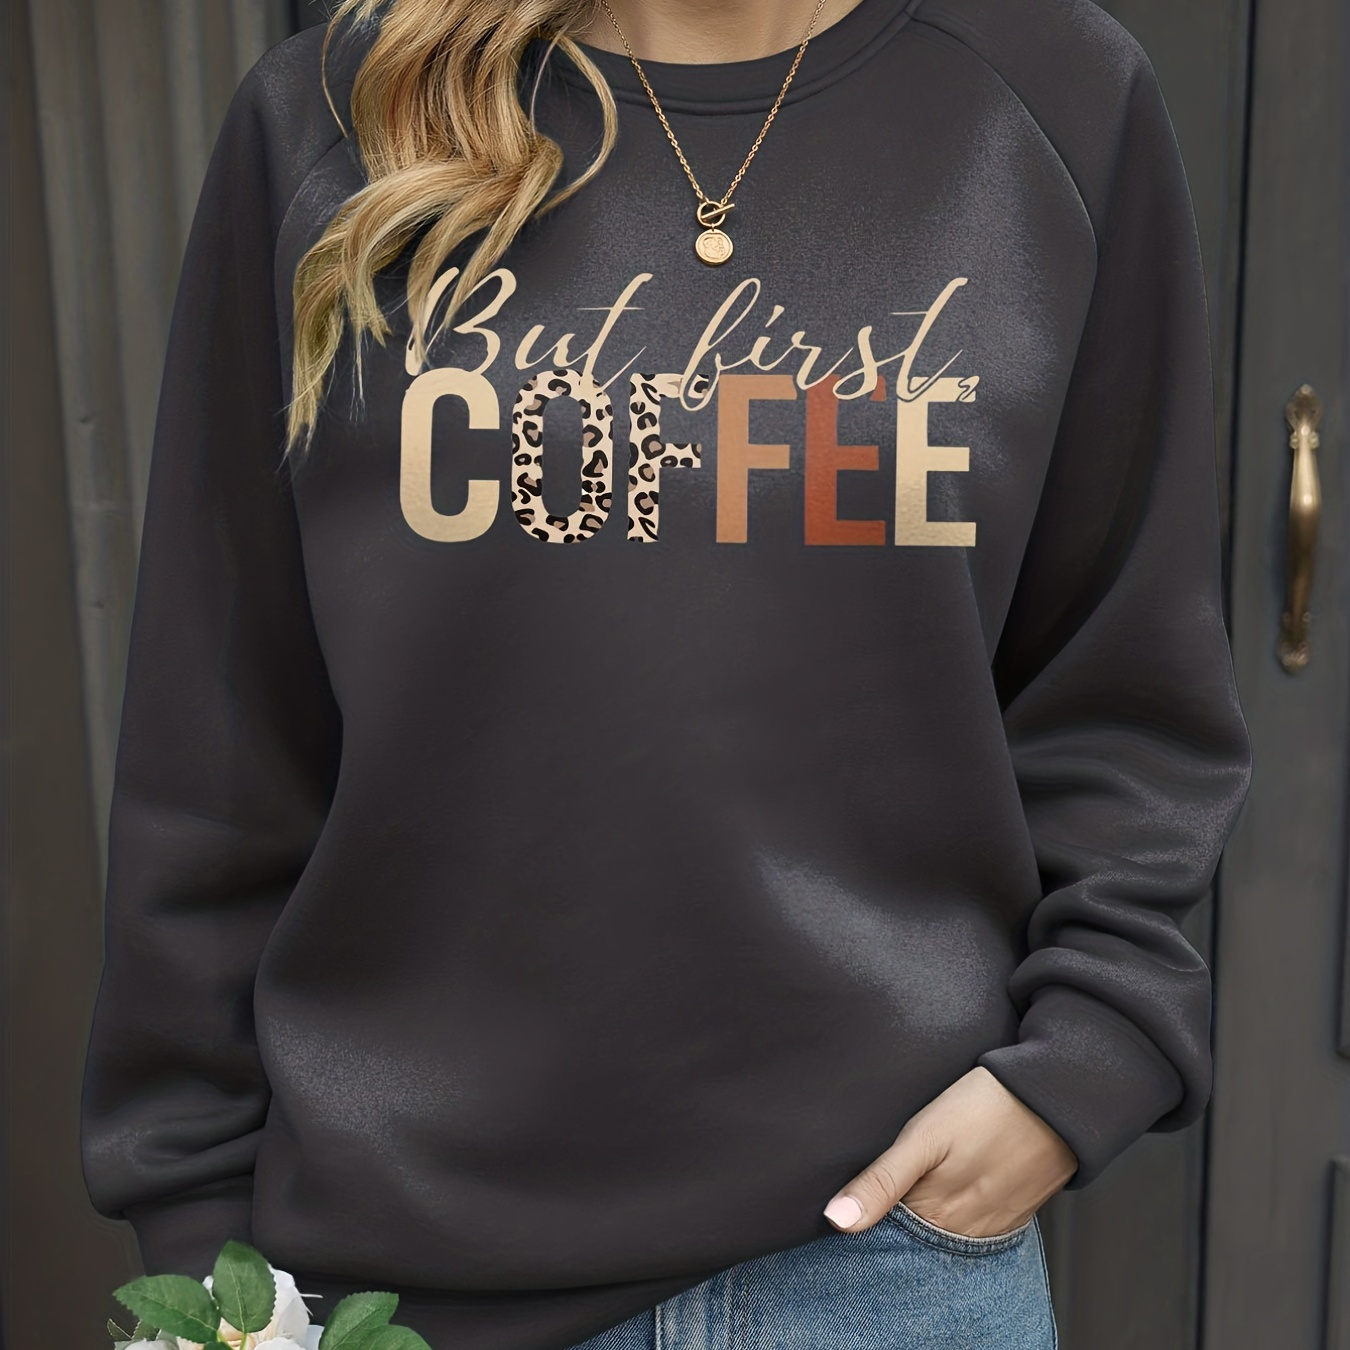 

But First Coffee Print Pullover Sweatshirt, Casual Long Sleeve Crew Neck Sweatshirt For Spring & Fall, Women's Clothing